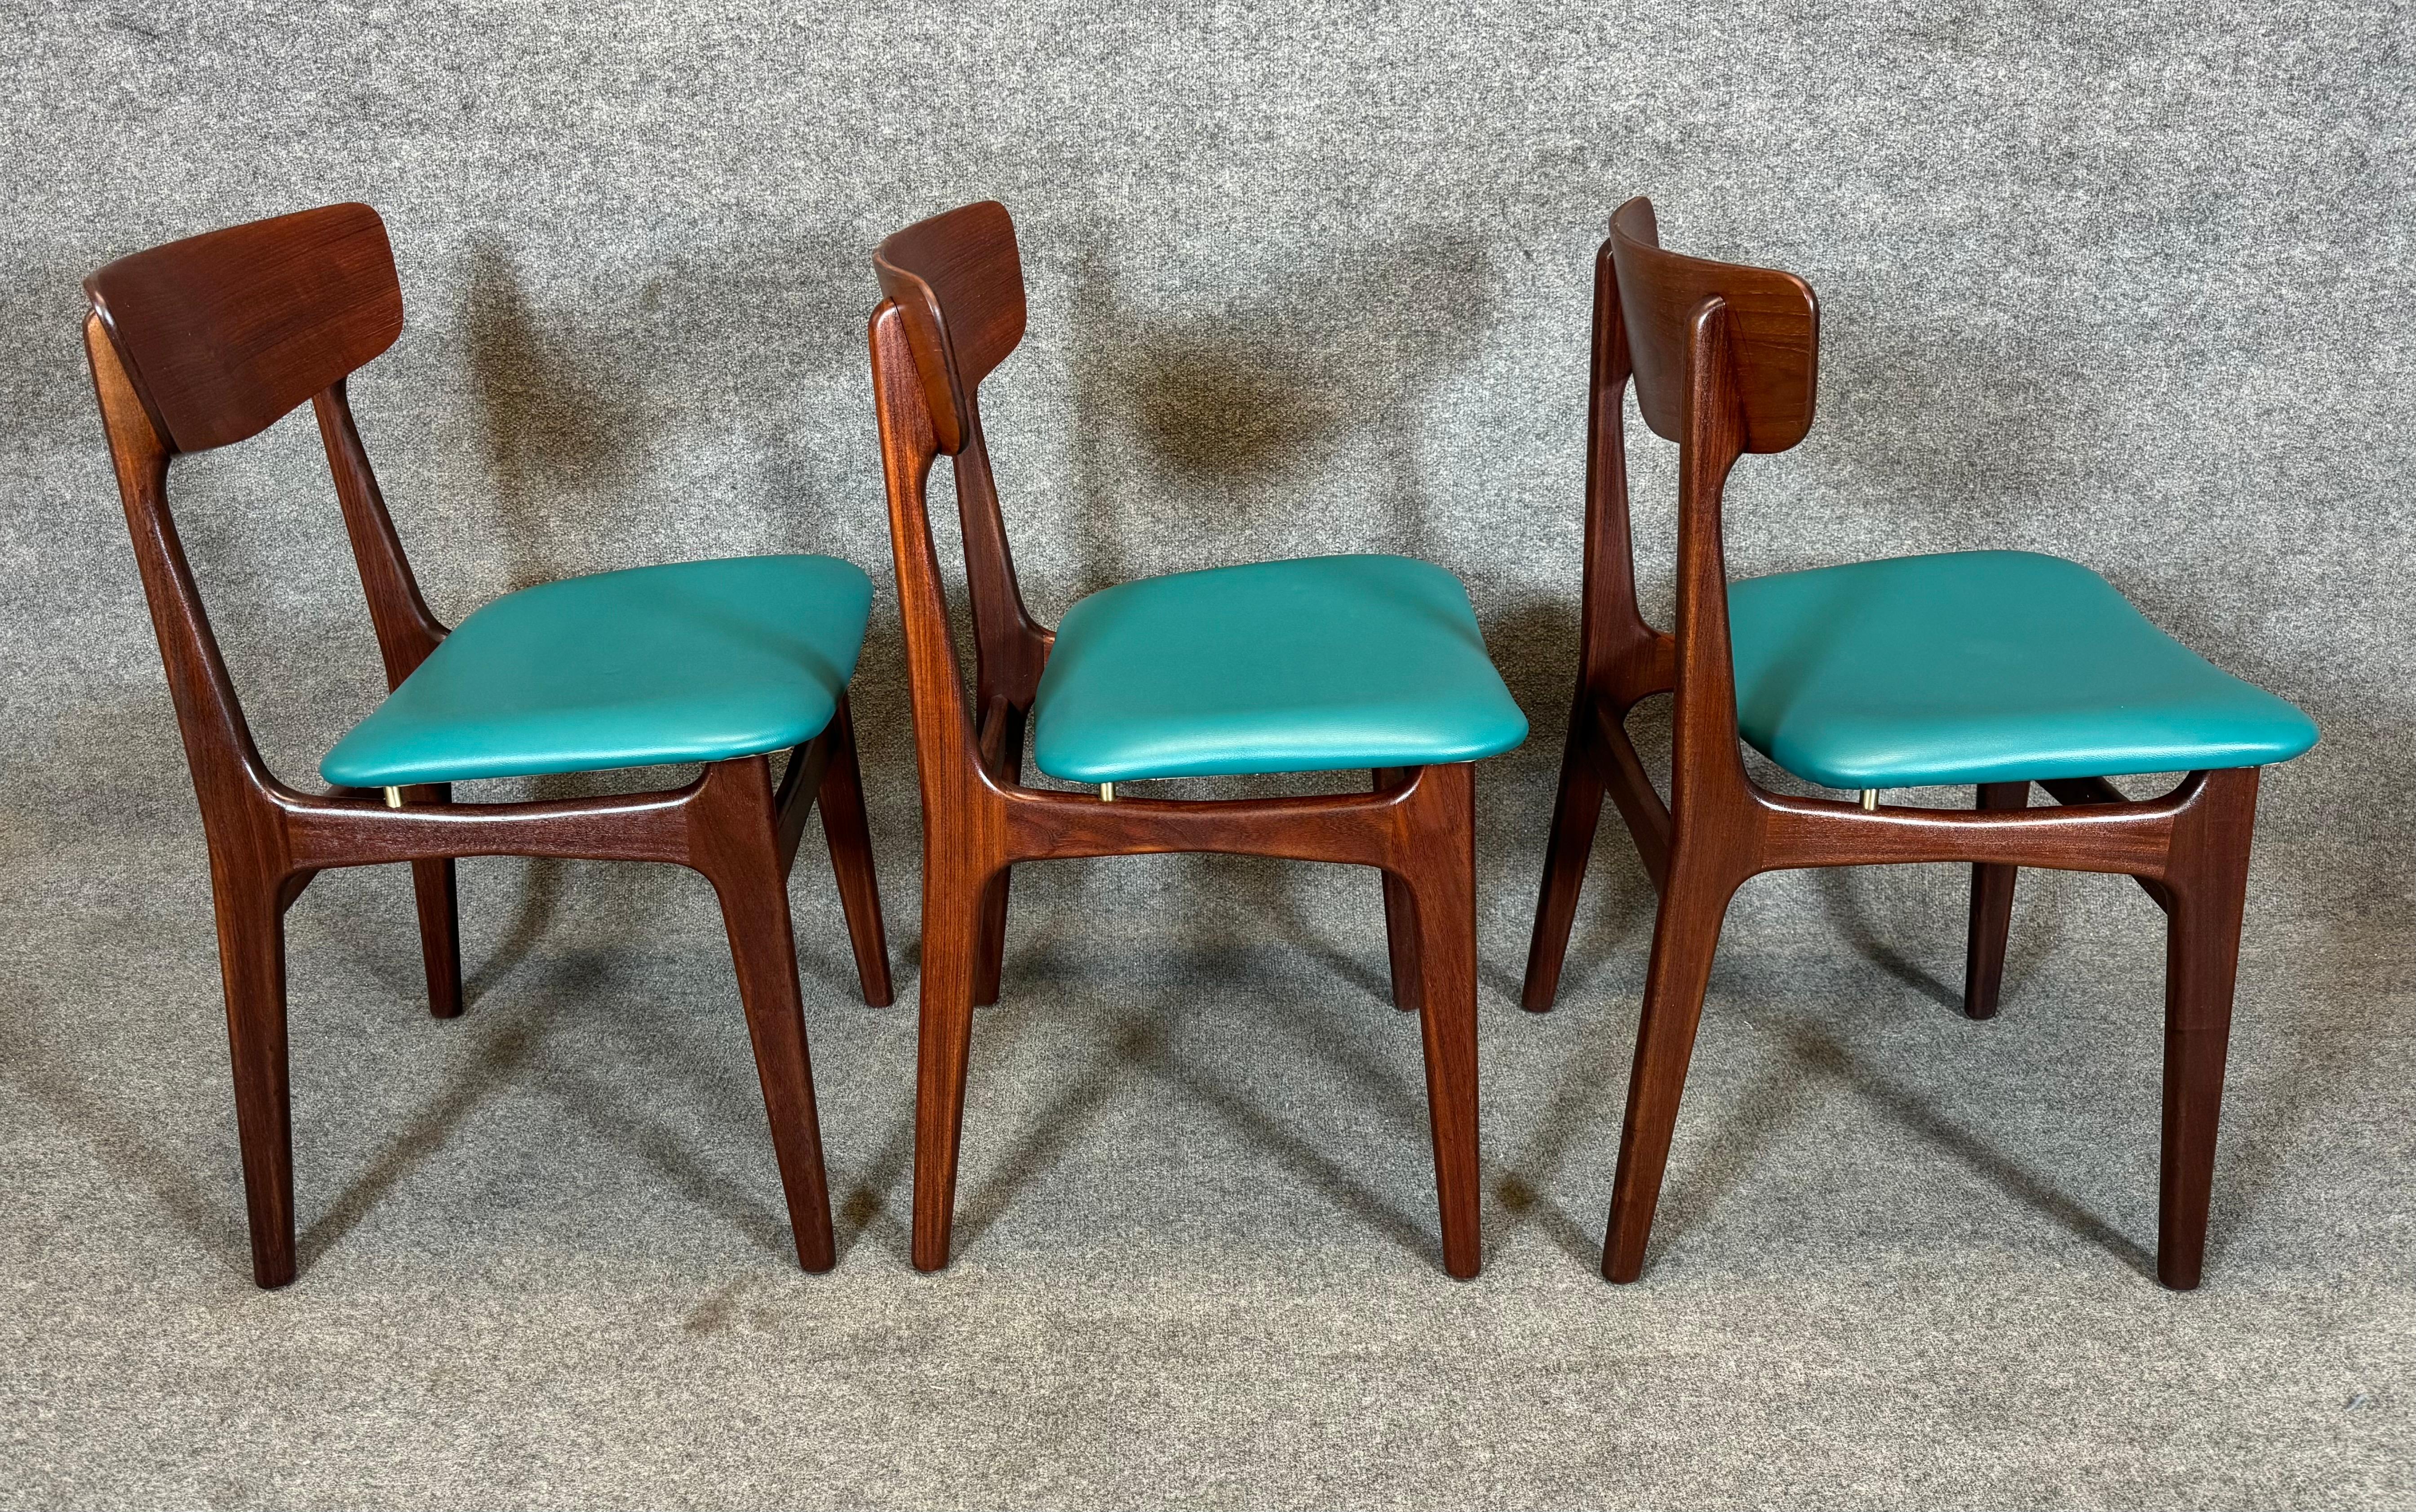 6 Vintage Danish Mid Century Modern Teak Dining Chairs by Schønning & Elgaard In Good Condition For Sale In San Marcos, CA